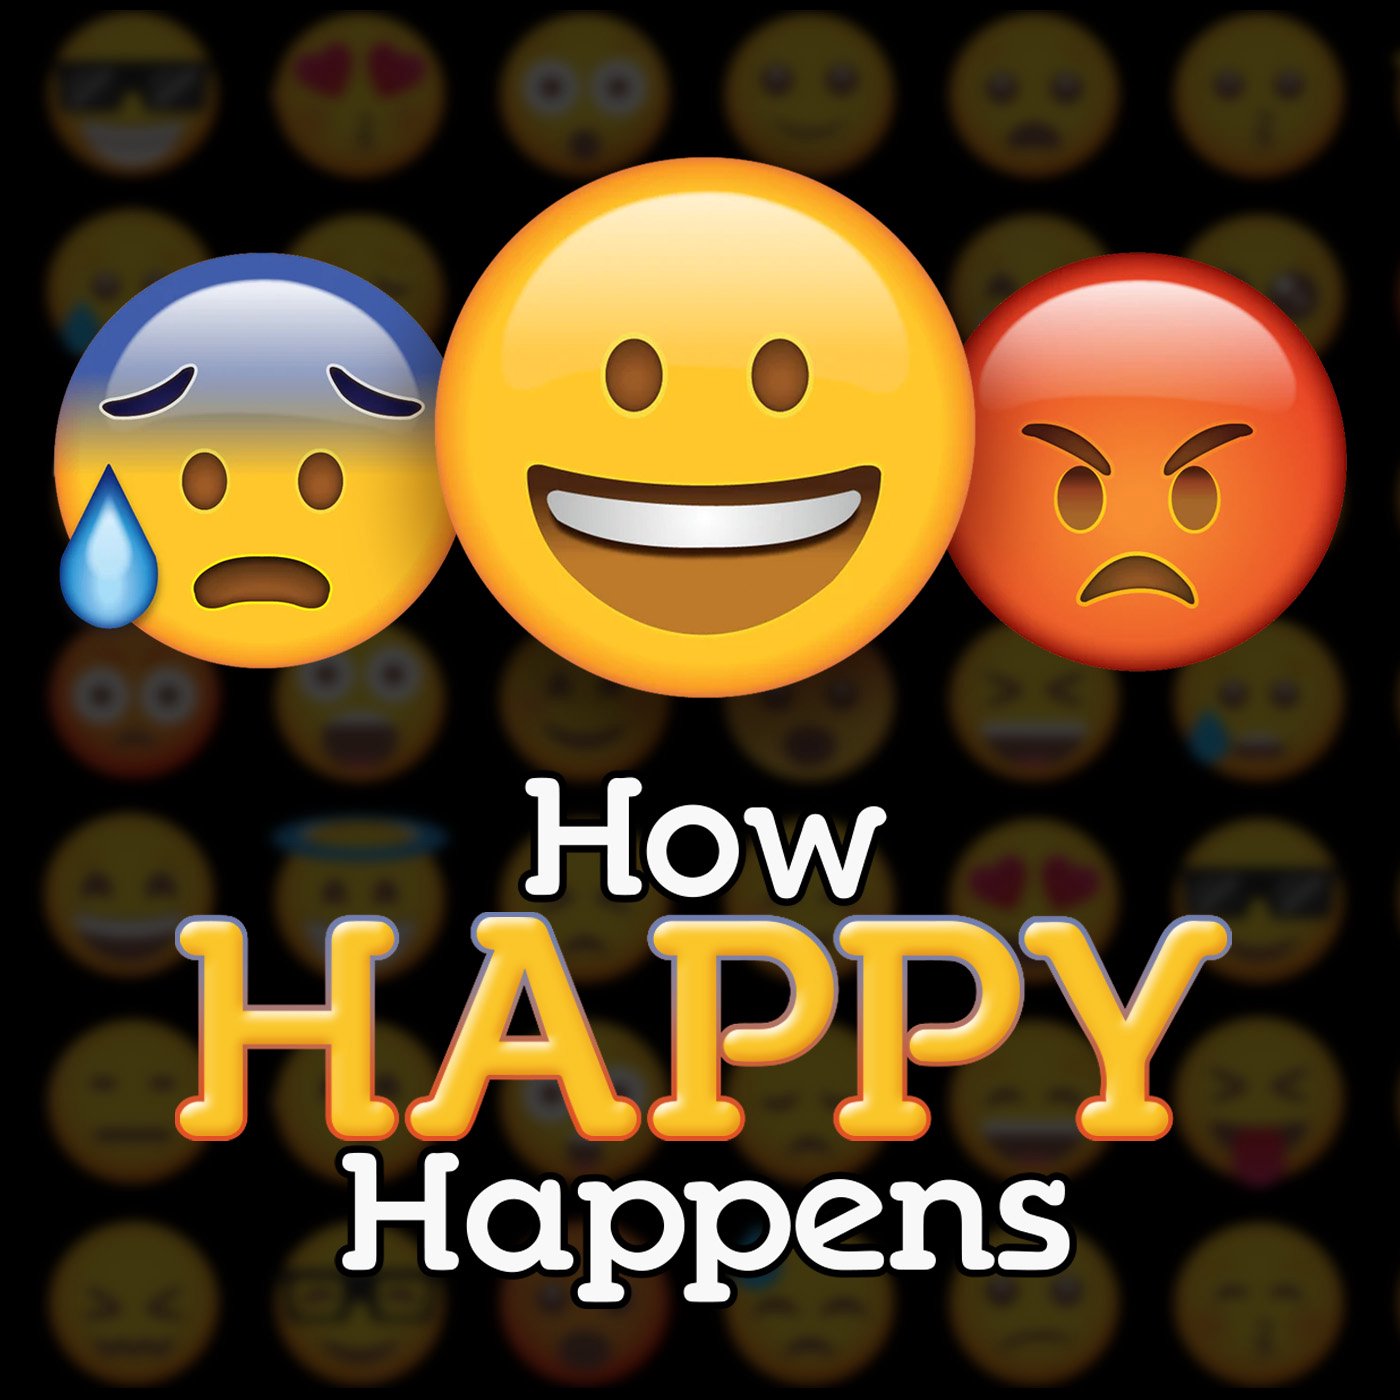 How Happy Happens: Happy for One Day